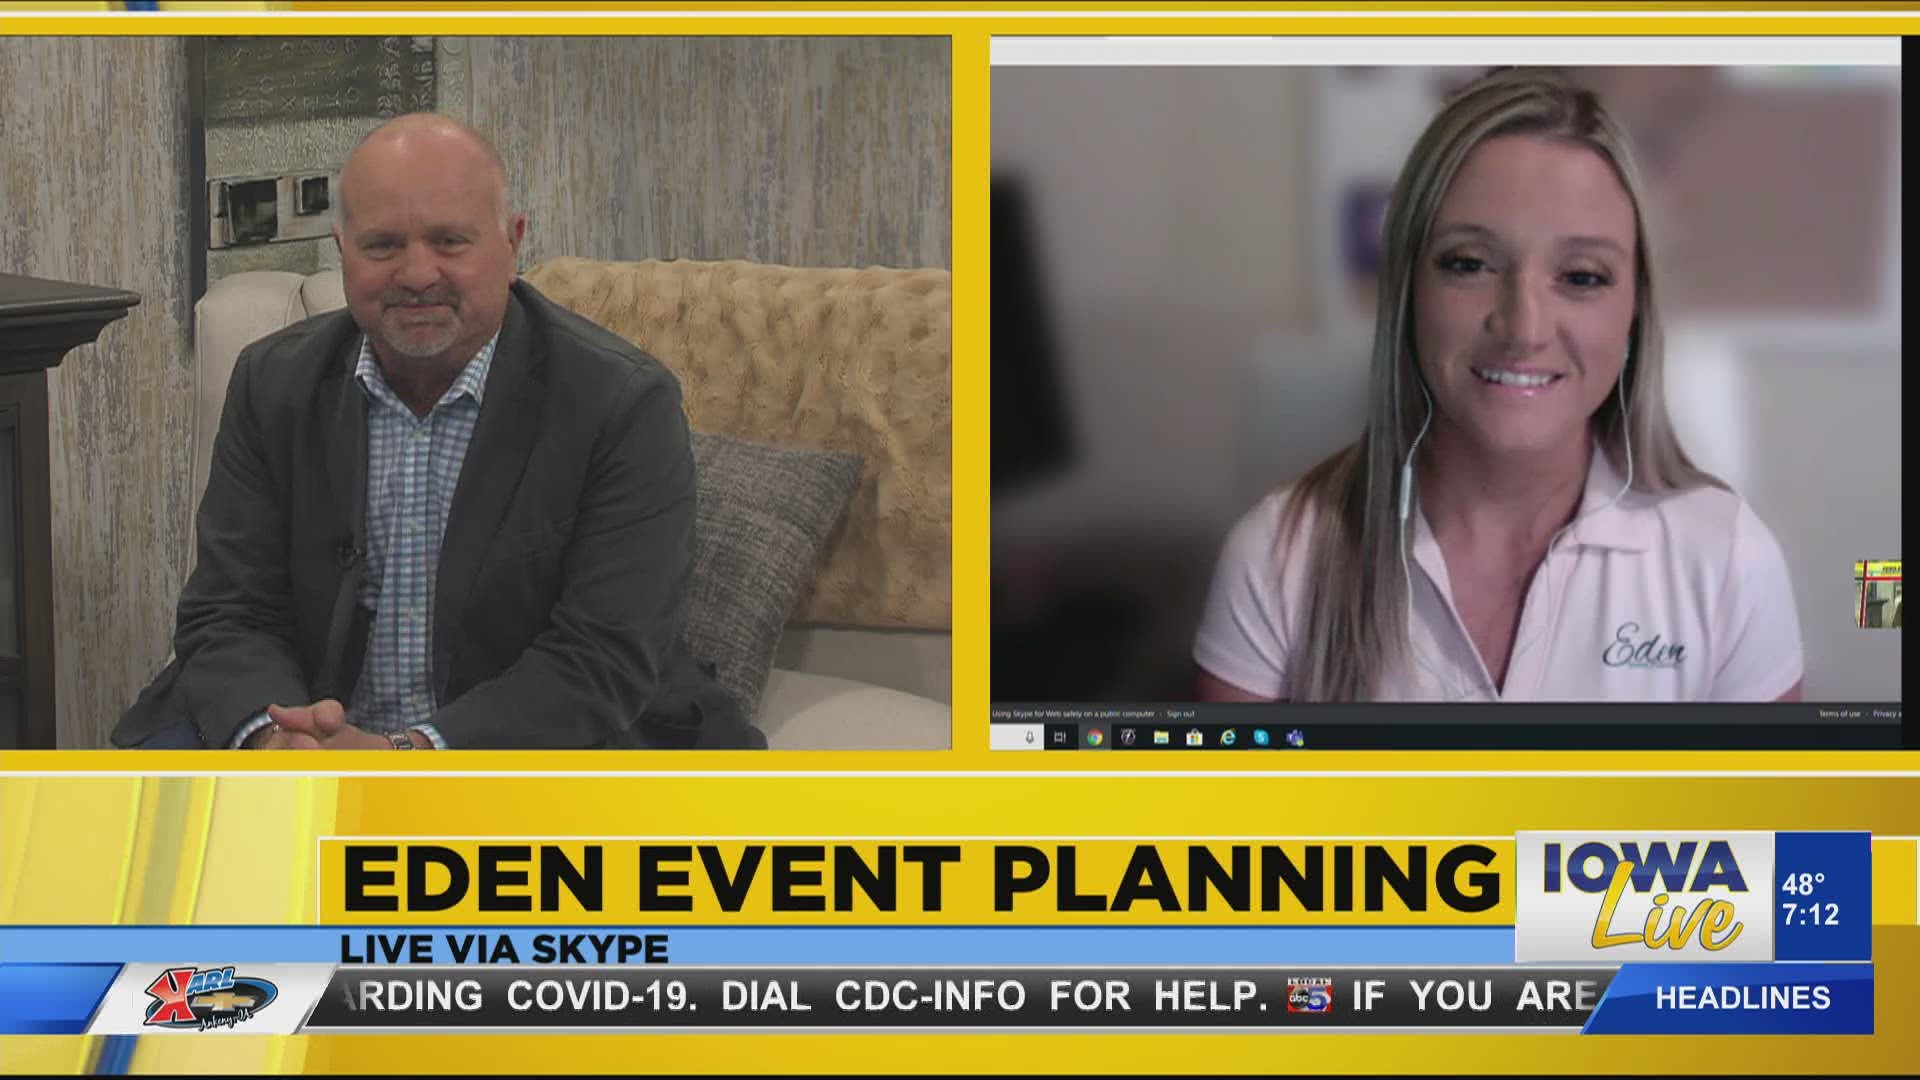 Eden Event Planning gives us tips on planning your wedding during this time